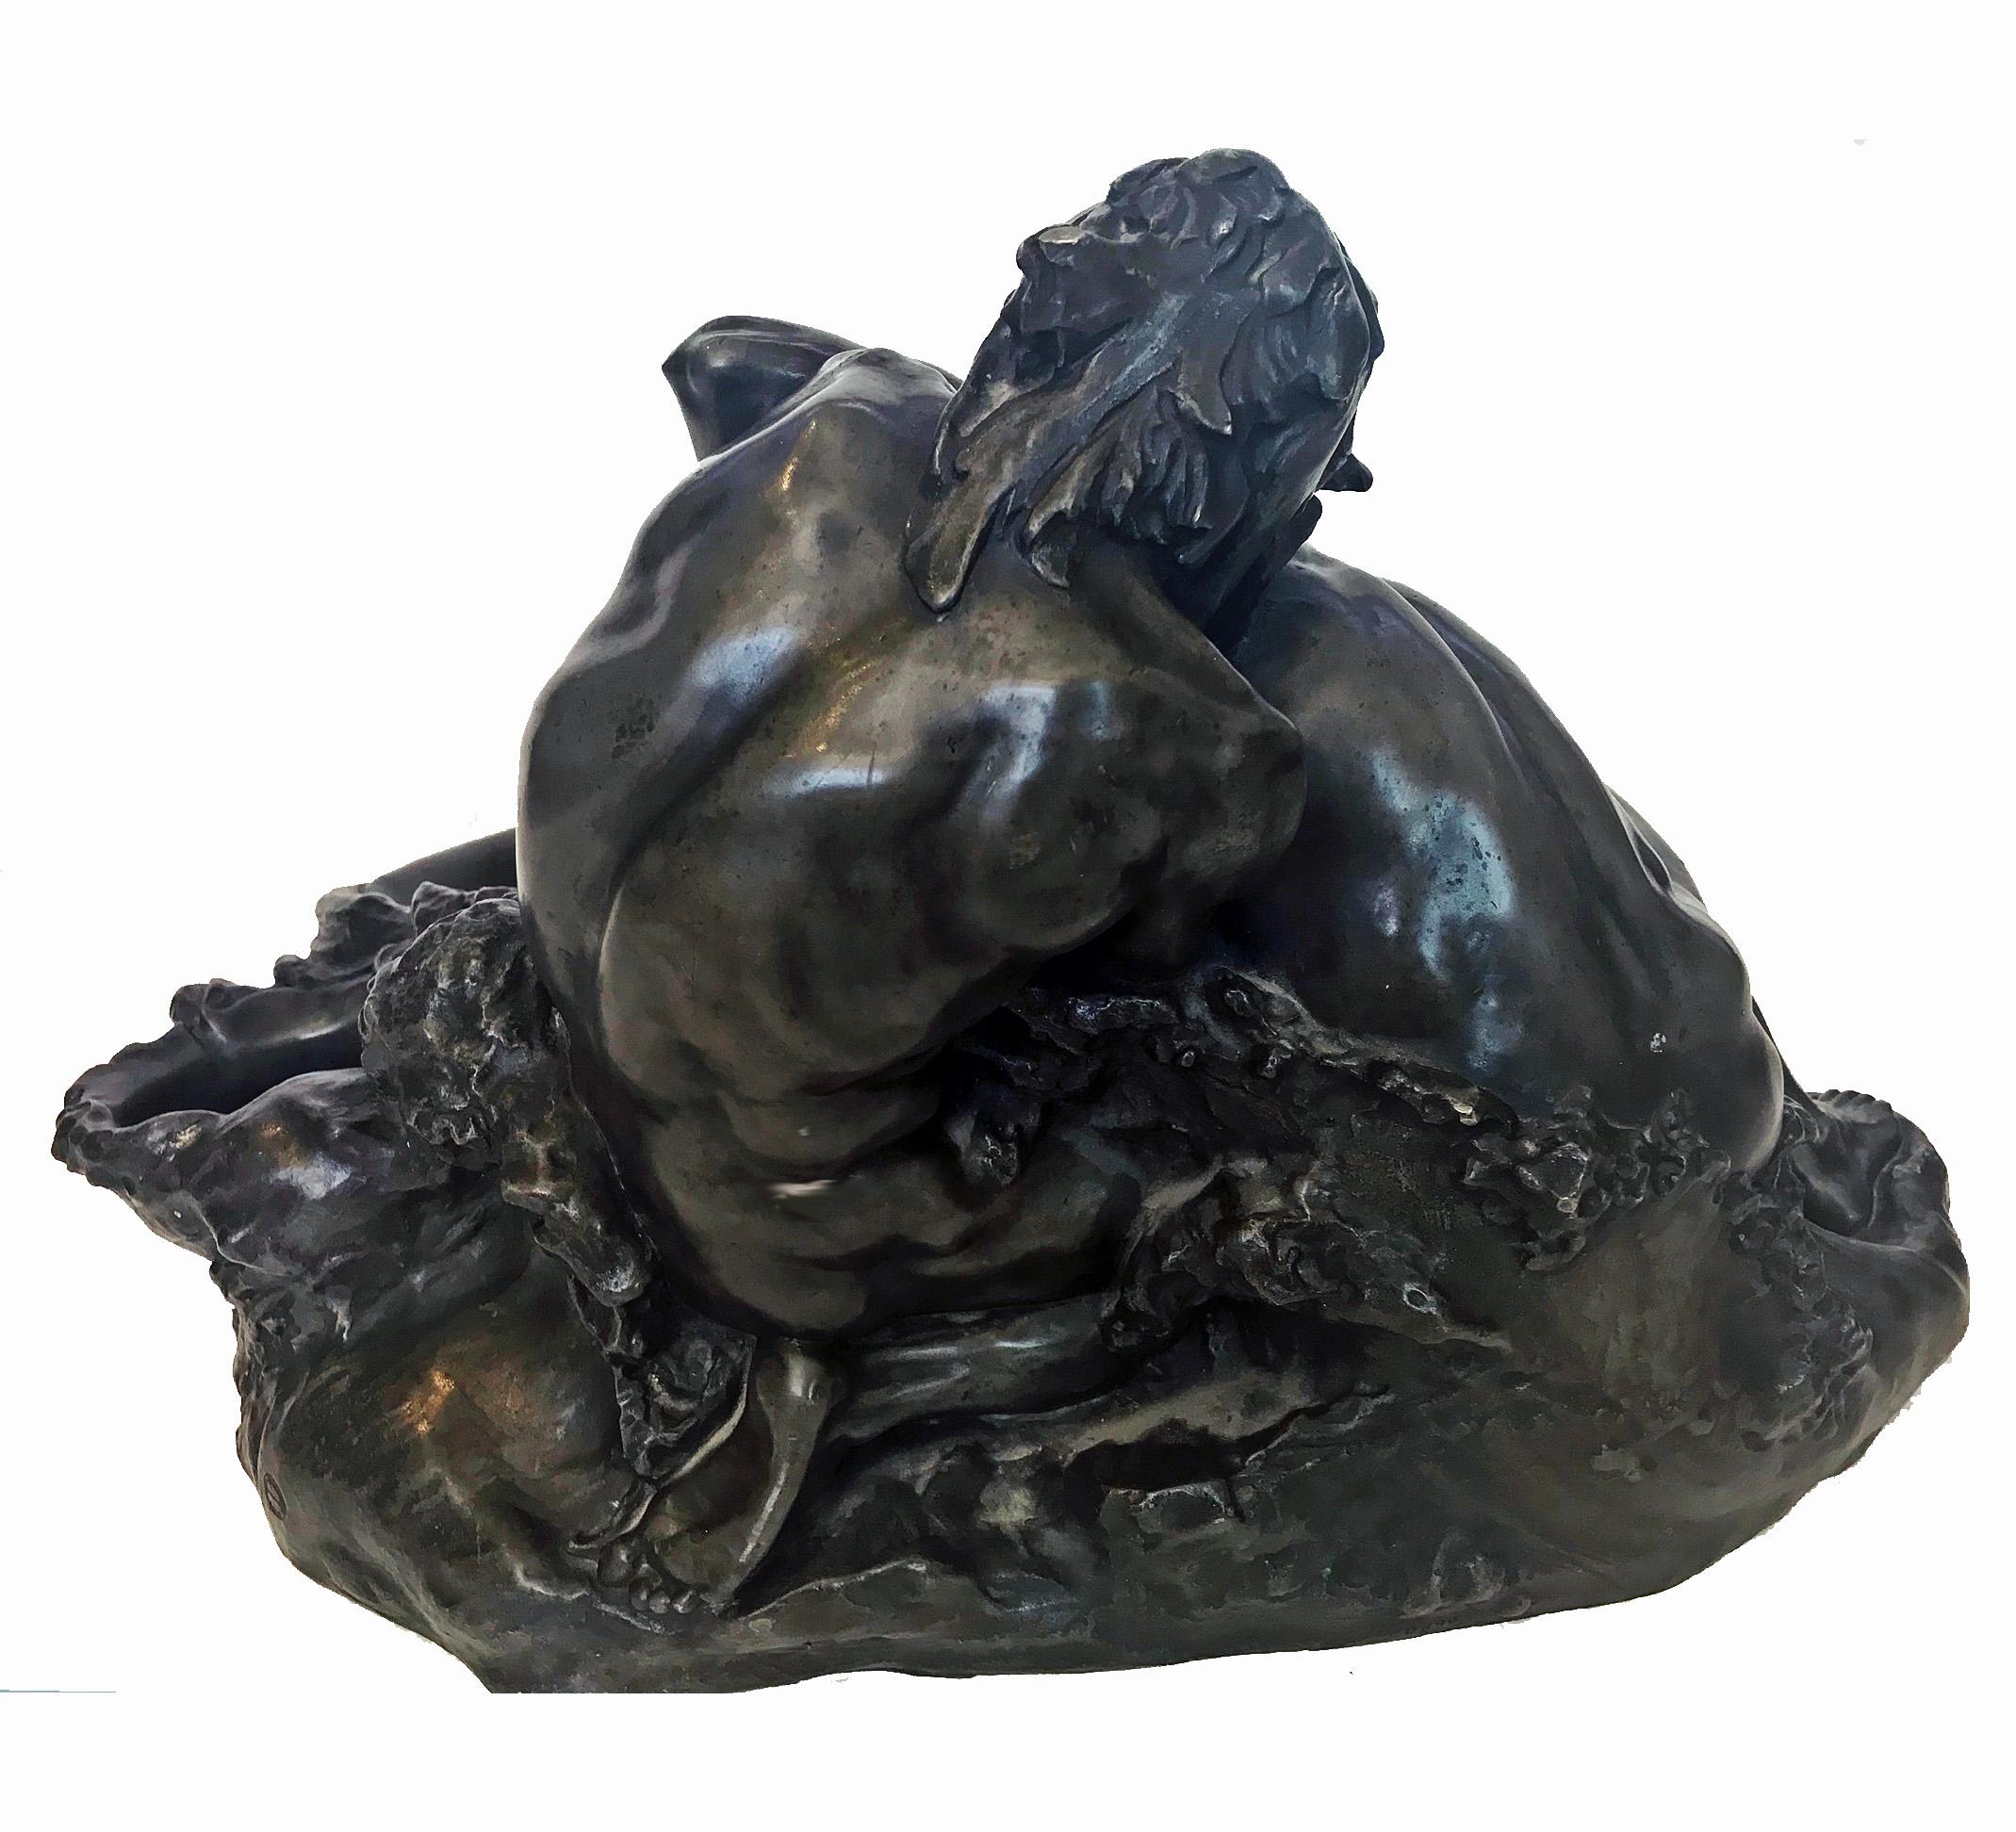 Gustave Frédéric Michel 1851-1924. Important sculpture, Les Lutteurs...The Wrestlers... in the form of a centerpiece. The cast bronze metal piece represents two male wresters struggling around a large sea shell in the waves. Dark grey green patina.